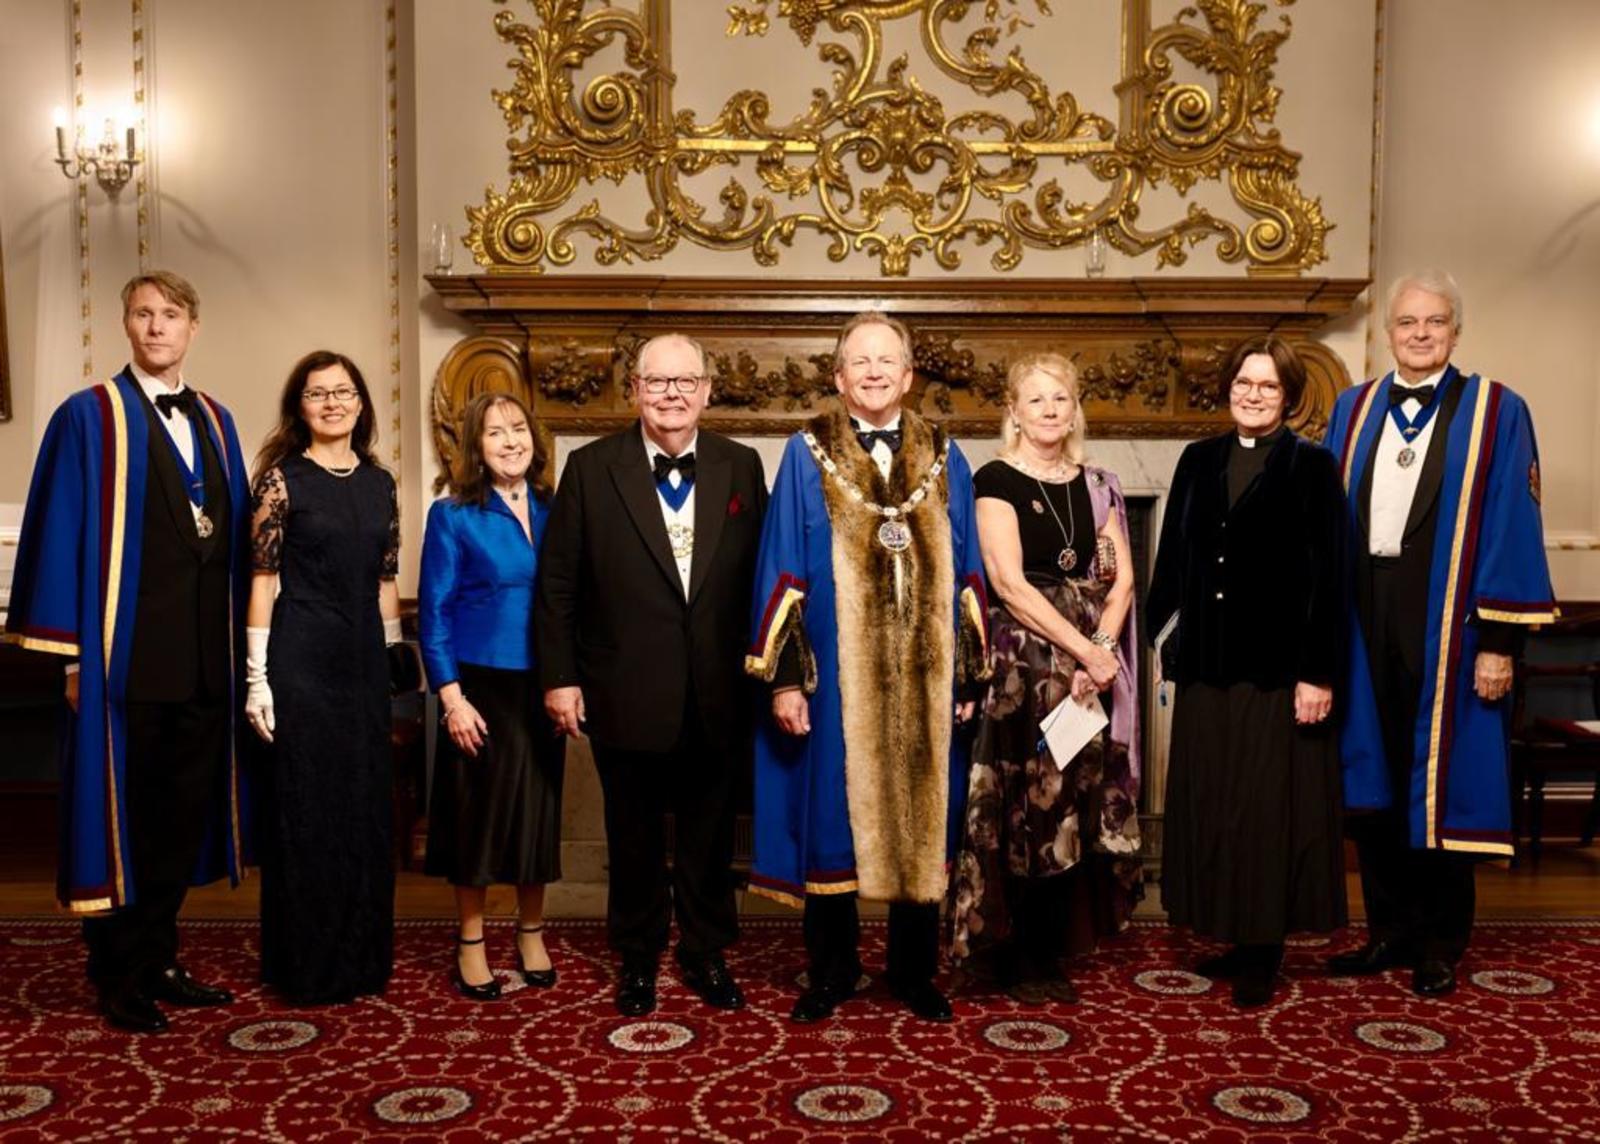 30 October 2023 – A delight to address the World Traders at the Installation of Michael Larsen as Master, held at the Grade I listed Stationers’ Hall